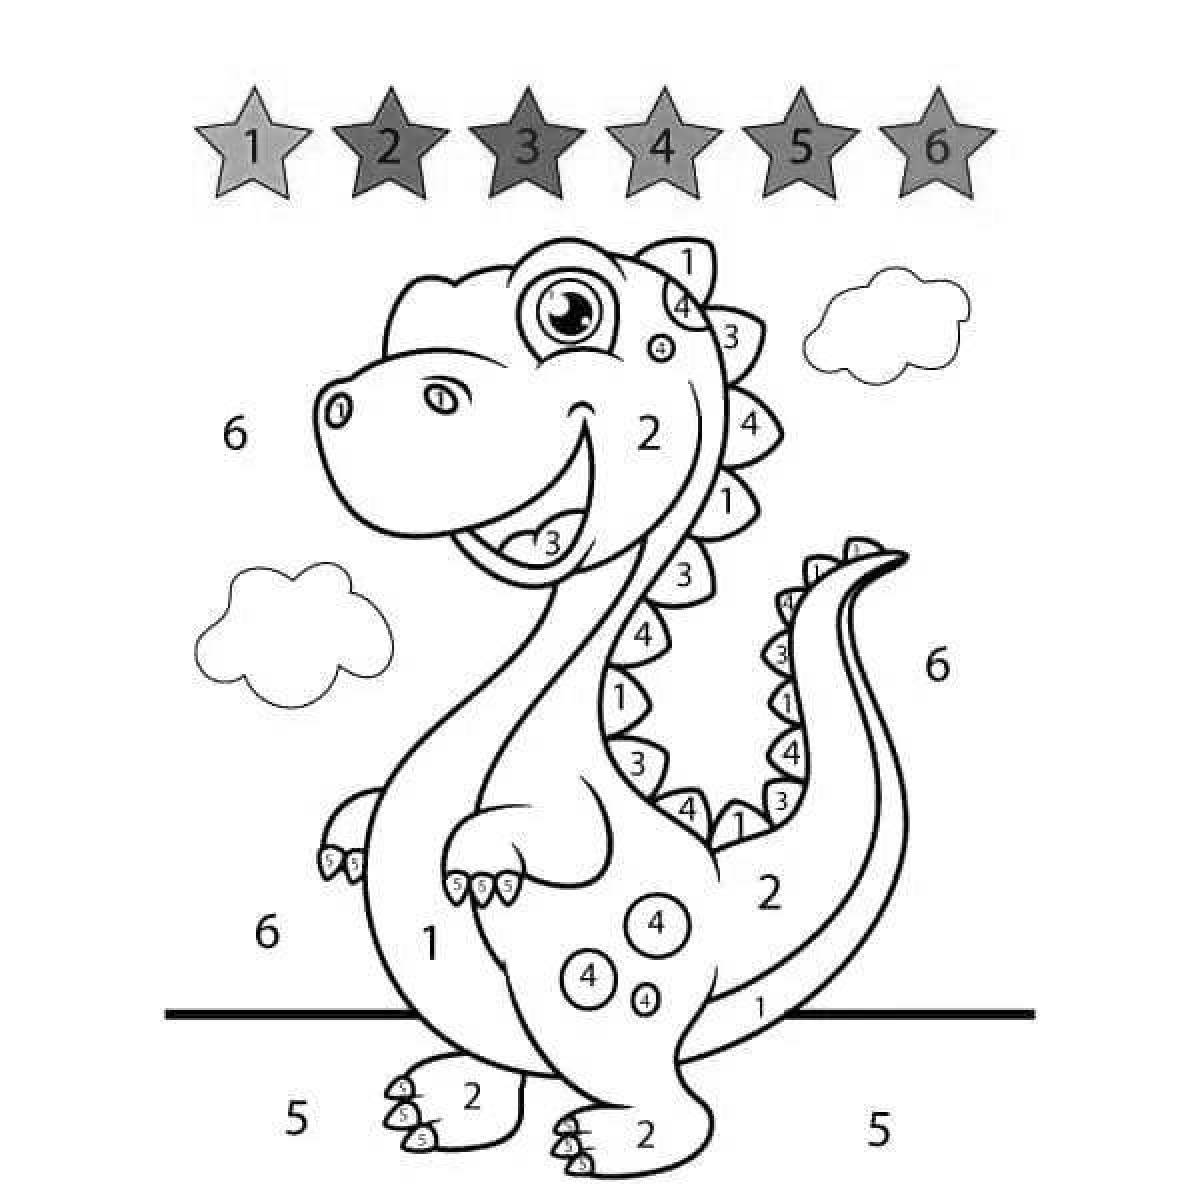 Adorable dinosaurs coloring by numbers